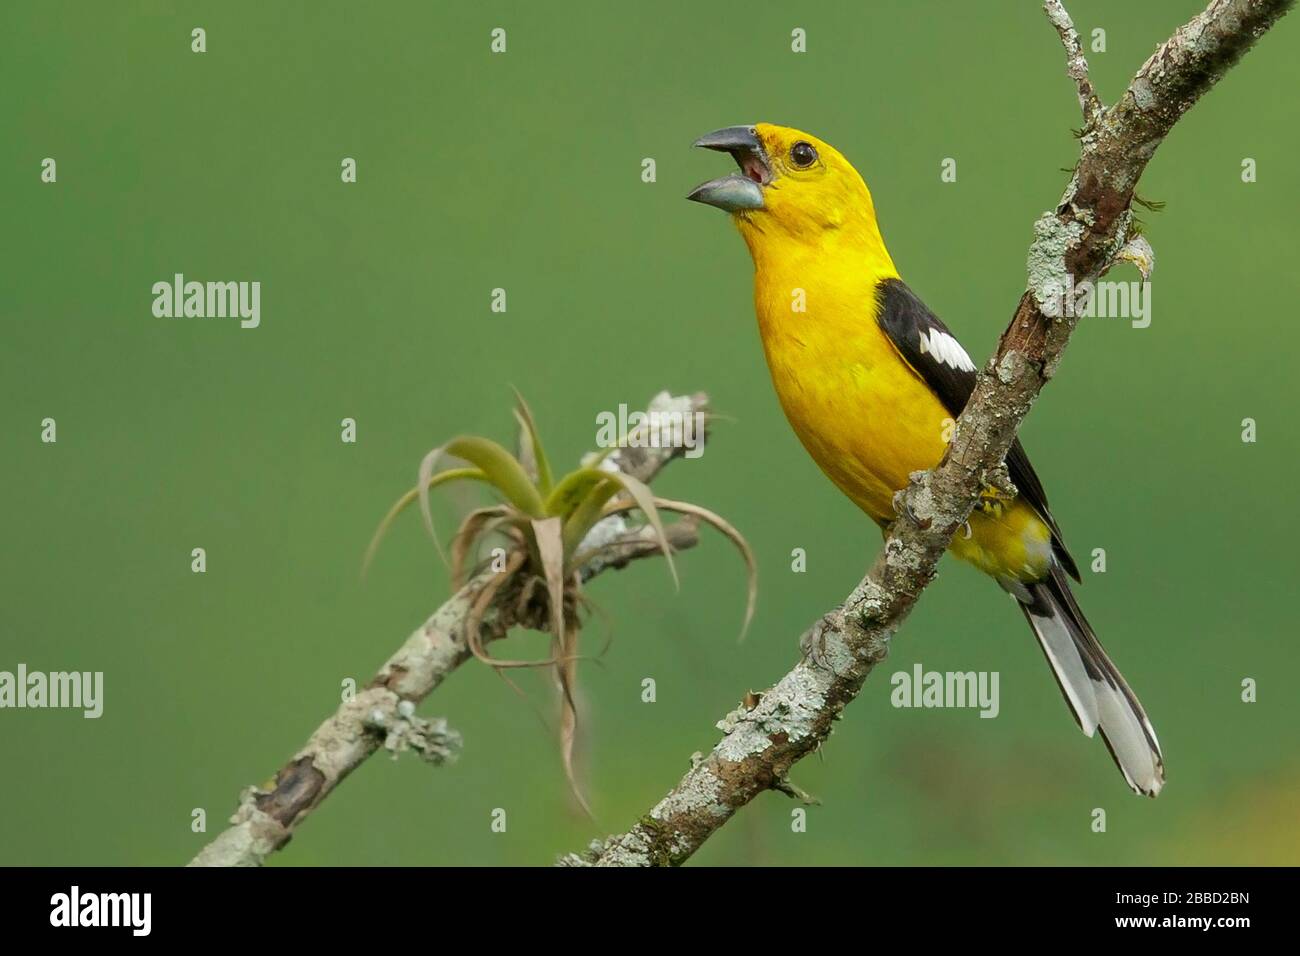 Southern Yellow-Grosbeak (Pheucticus chrysogaster) perched on a branch in the South of Ecuador. Stock Photo